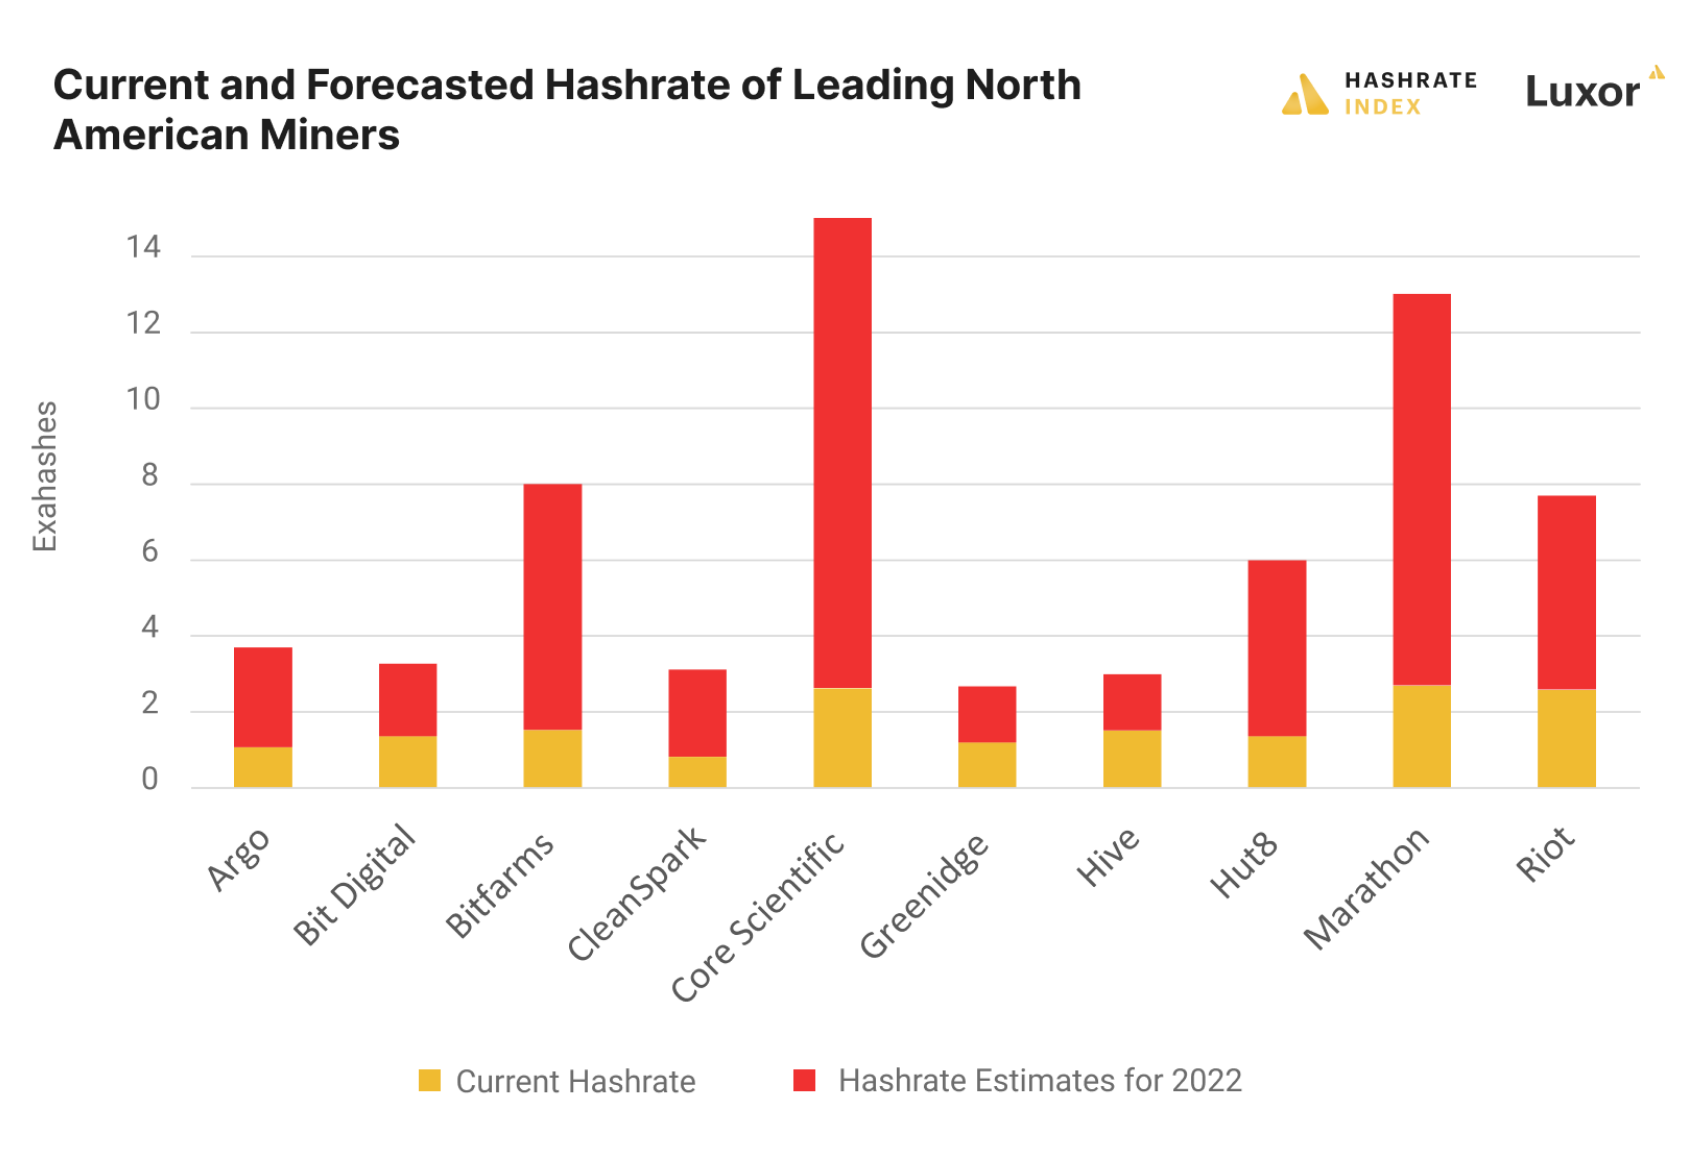 2021 hashrate is based on the most recent SEC filings, press releases, and investor presentations available. 2022 hashrate forecast is based on company estimates in the most recent SEC filings, press releases, and investor presentations available; some estimates are based on EoY predictions while others are based on Q2 and Q3 predictions and are subject to change based on new orders or supply chain disruptions.